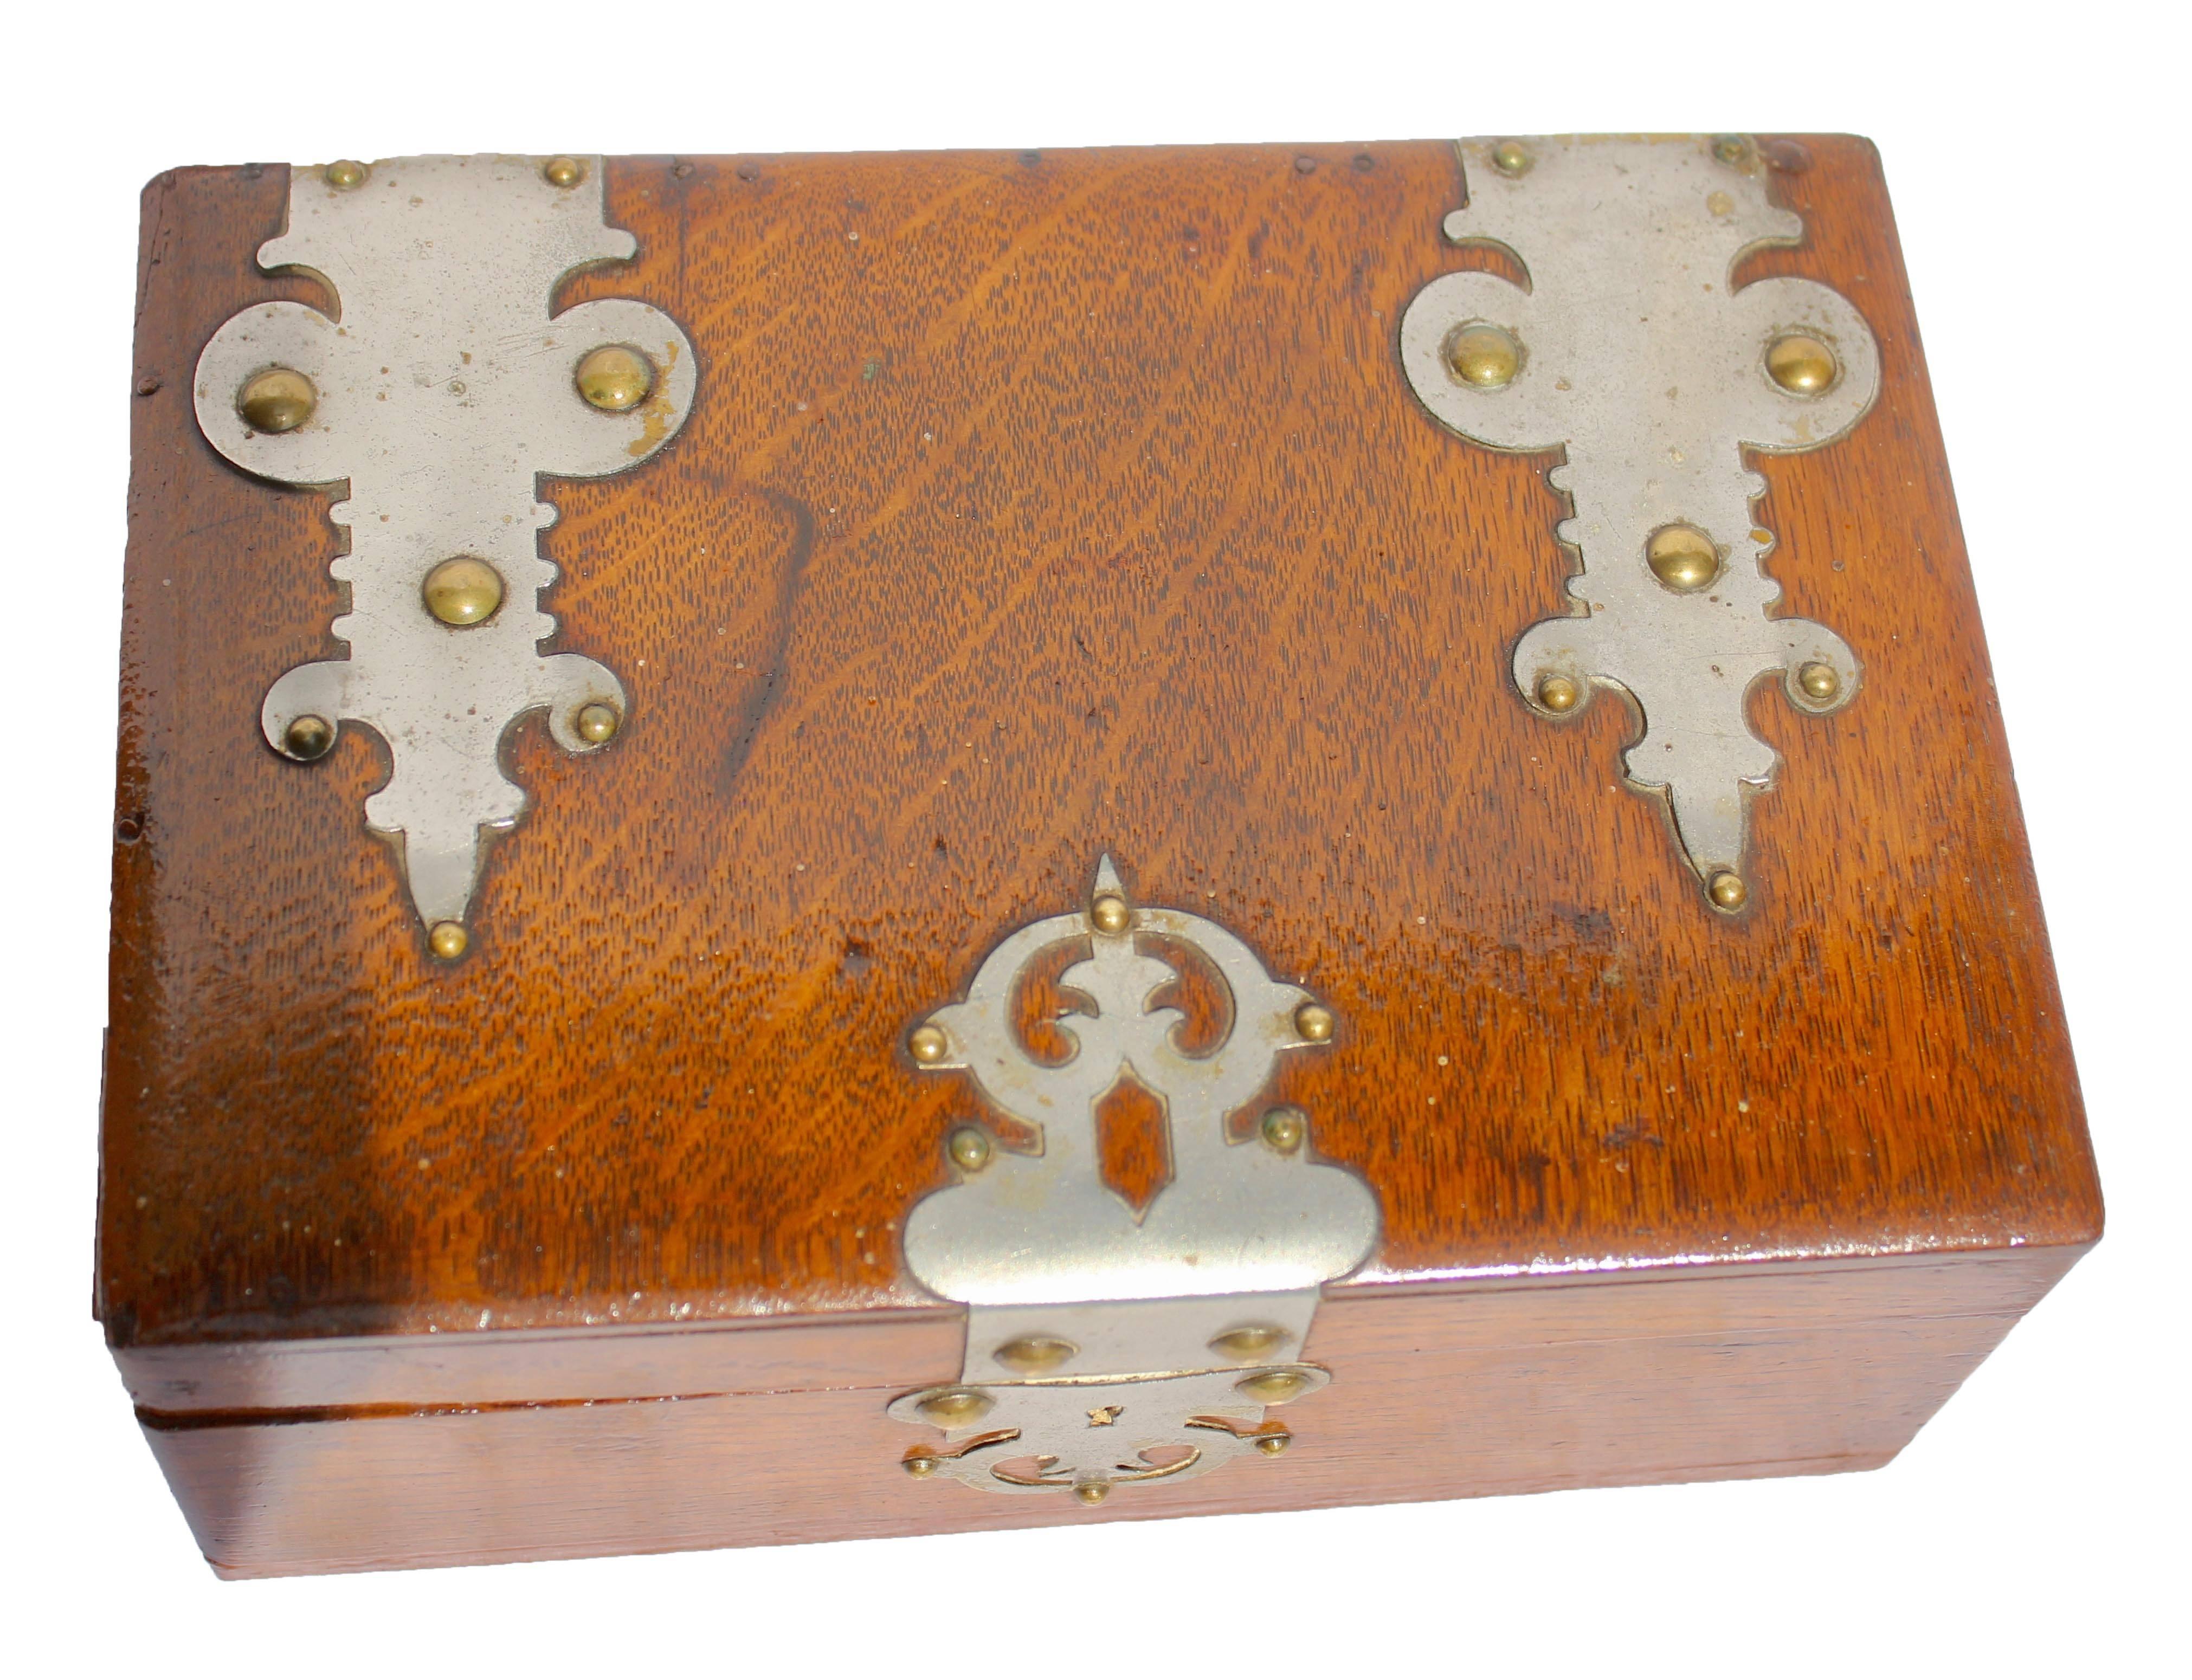 Solid oak Arts & Crafts box, Austria, circa 1890.

About
A solid oak box from the Arts & Crafts period,
Made in Austria.
A very special item with decorative metalwork on top. Definitely one of a kind.
Looks simply stunning.

Please don't